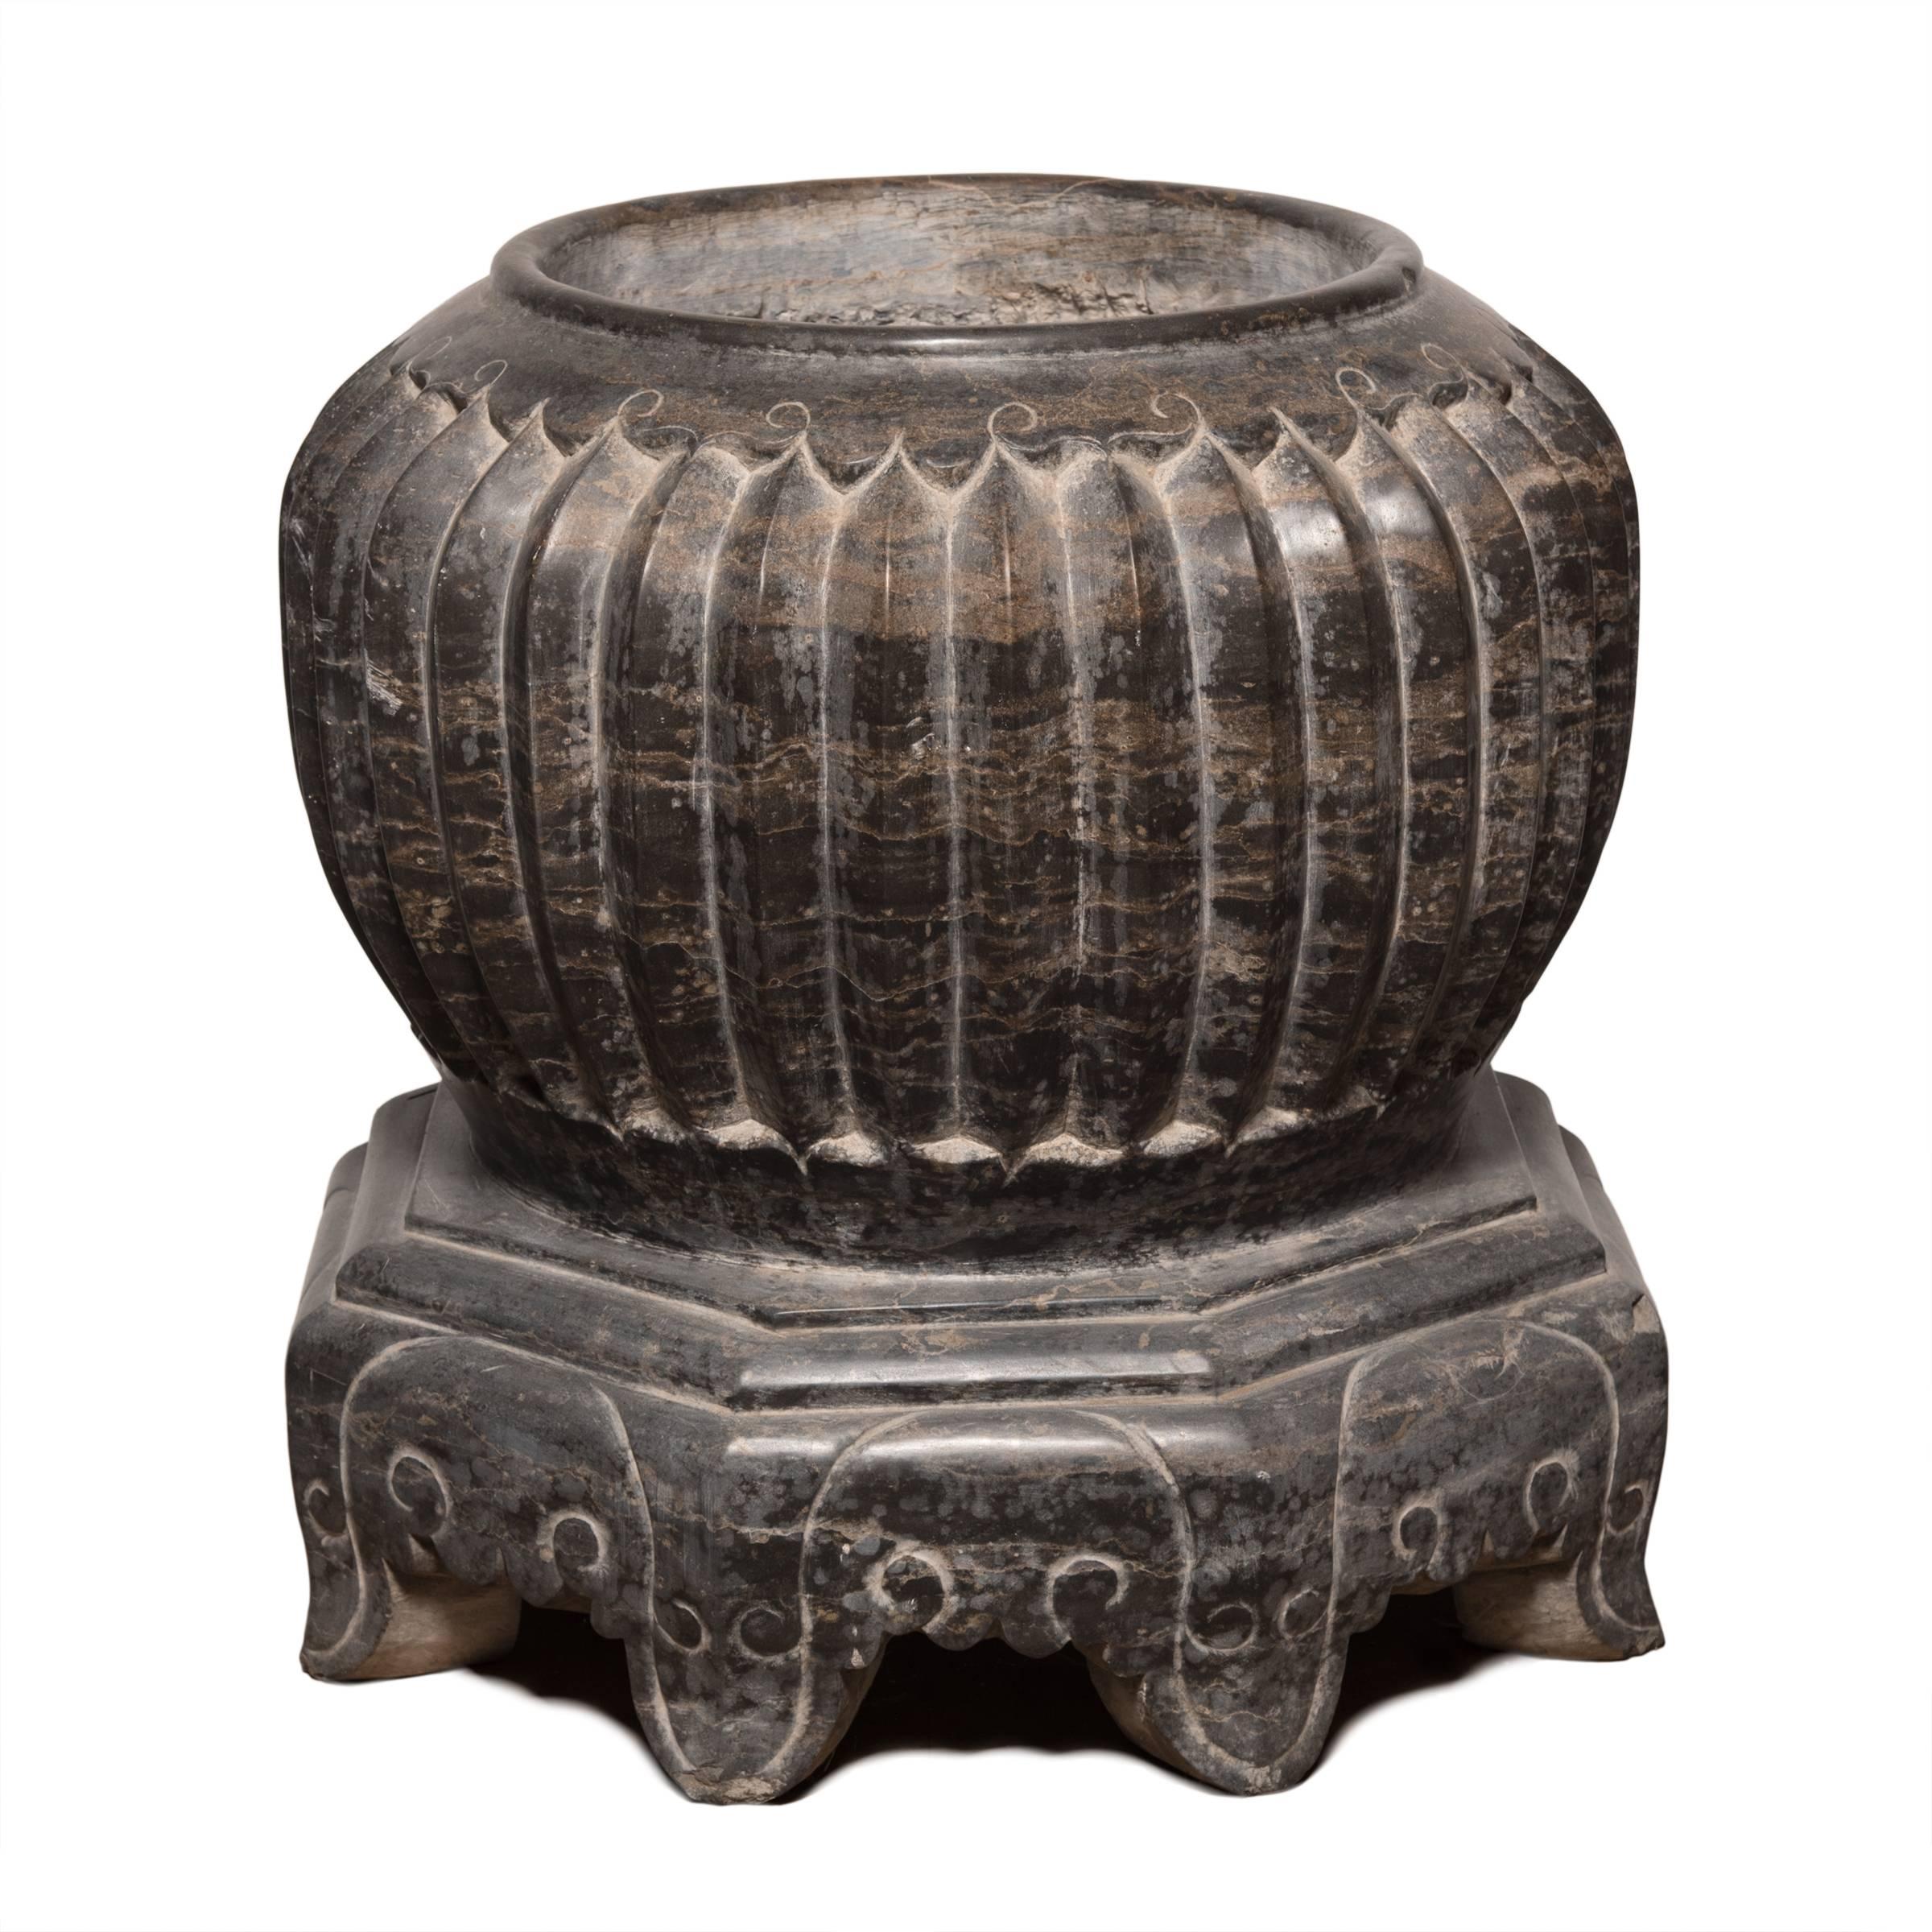 Carved from a solid block of dark marble, this melon form basin offers a significant sculptural presence. The raised pleats stand in for a melon’s ribs and diminish in height as they run down to the masterfully footed base. A traditional symbol of